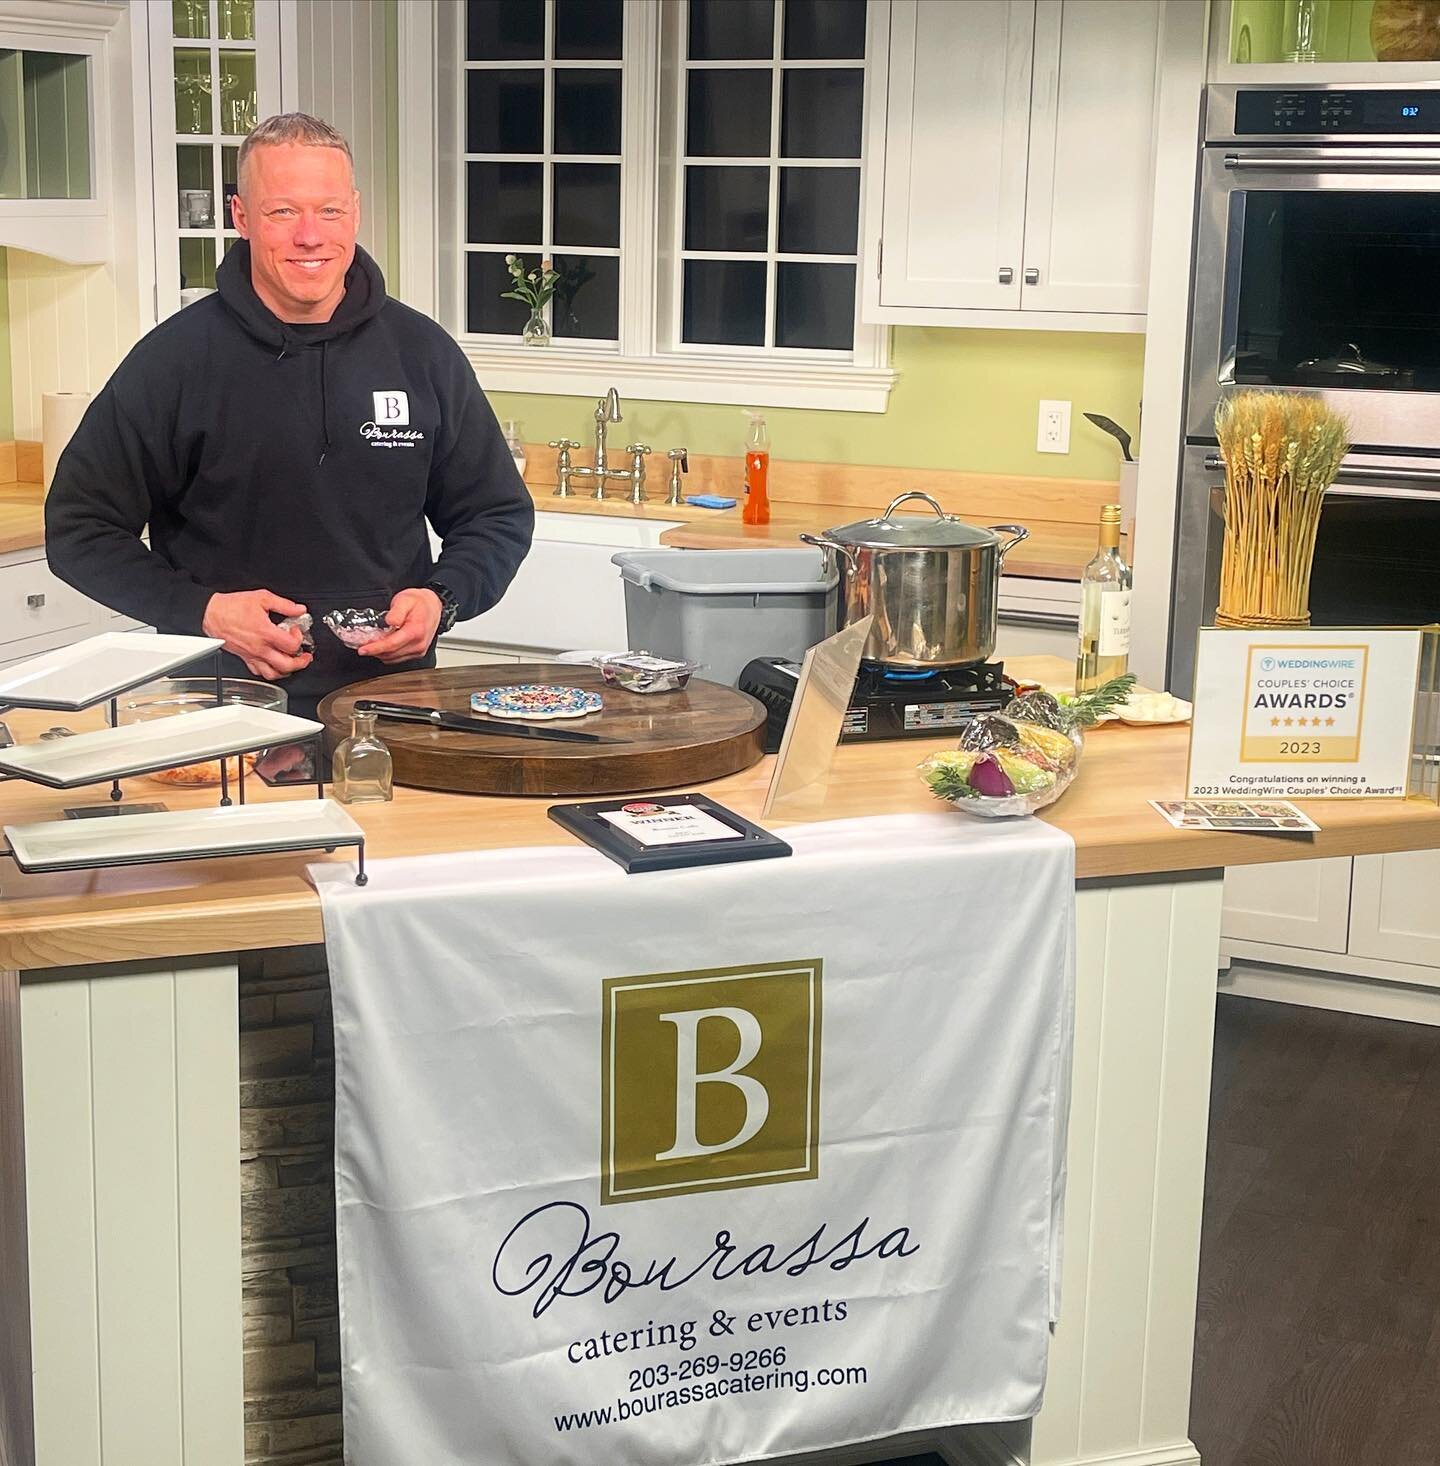 Tune in to @fox61news today at 9:30am est to catch us preparing a delicious spring/summer inspired lobster salad. You&rsquo;re not going to want to miss this one.

.
.
#cheflife  #foodie #wedding #lefebvreluxe #bourassacatering  #instafood #local #be